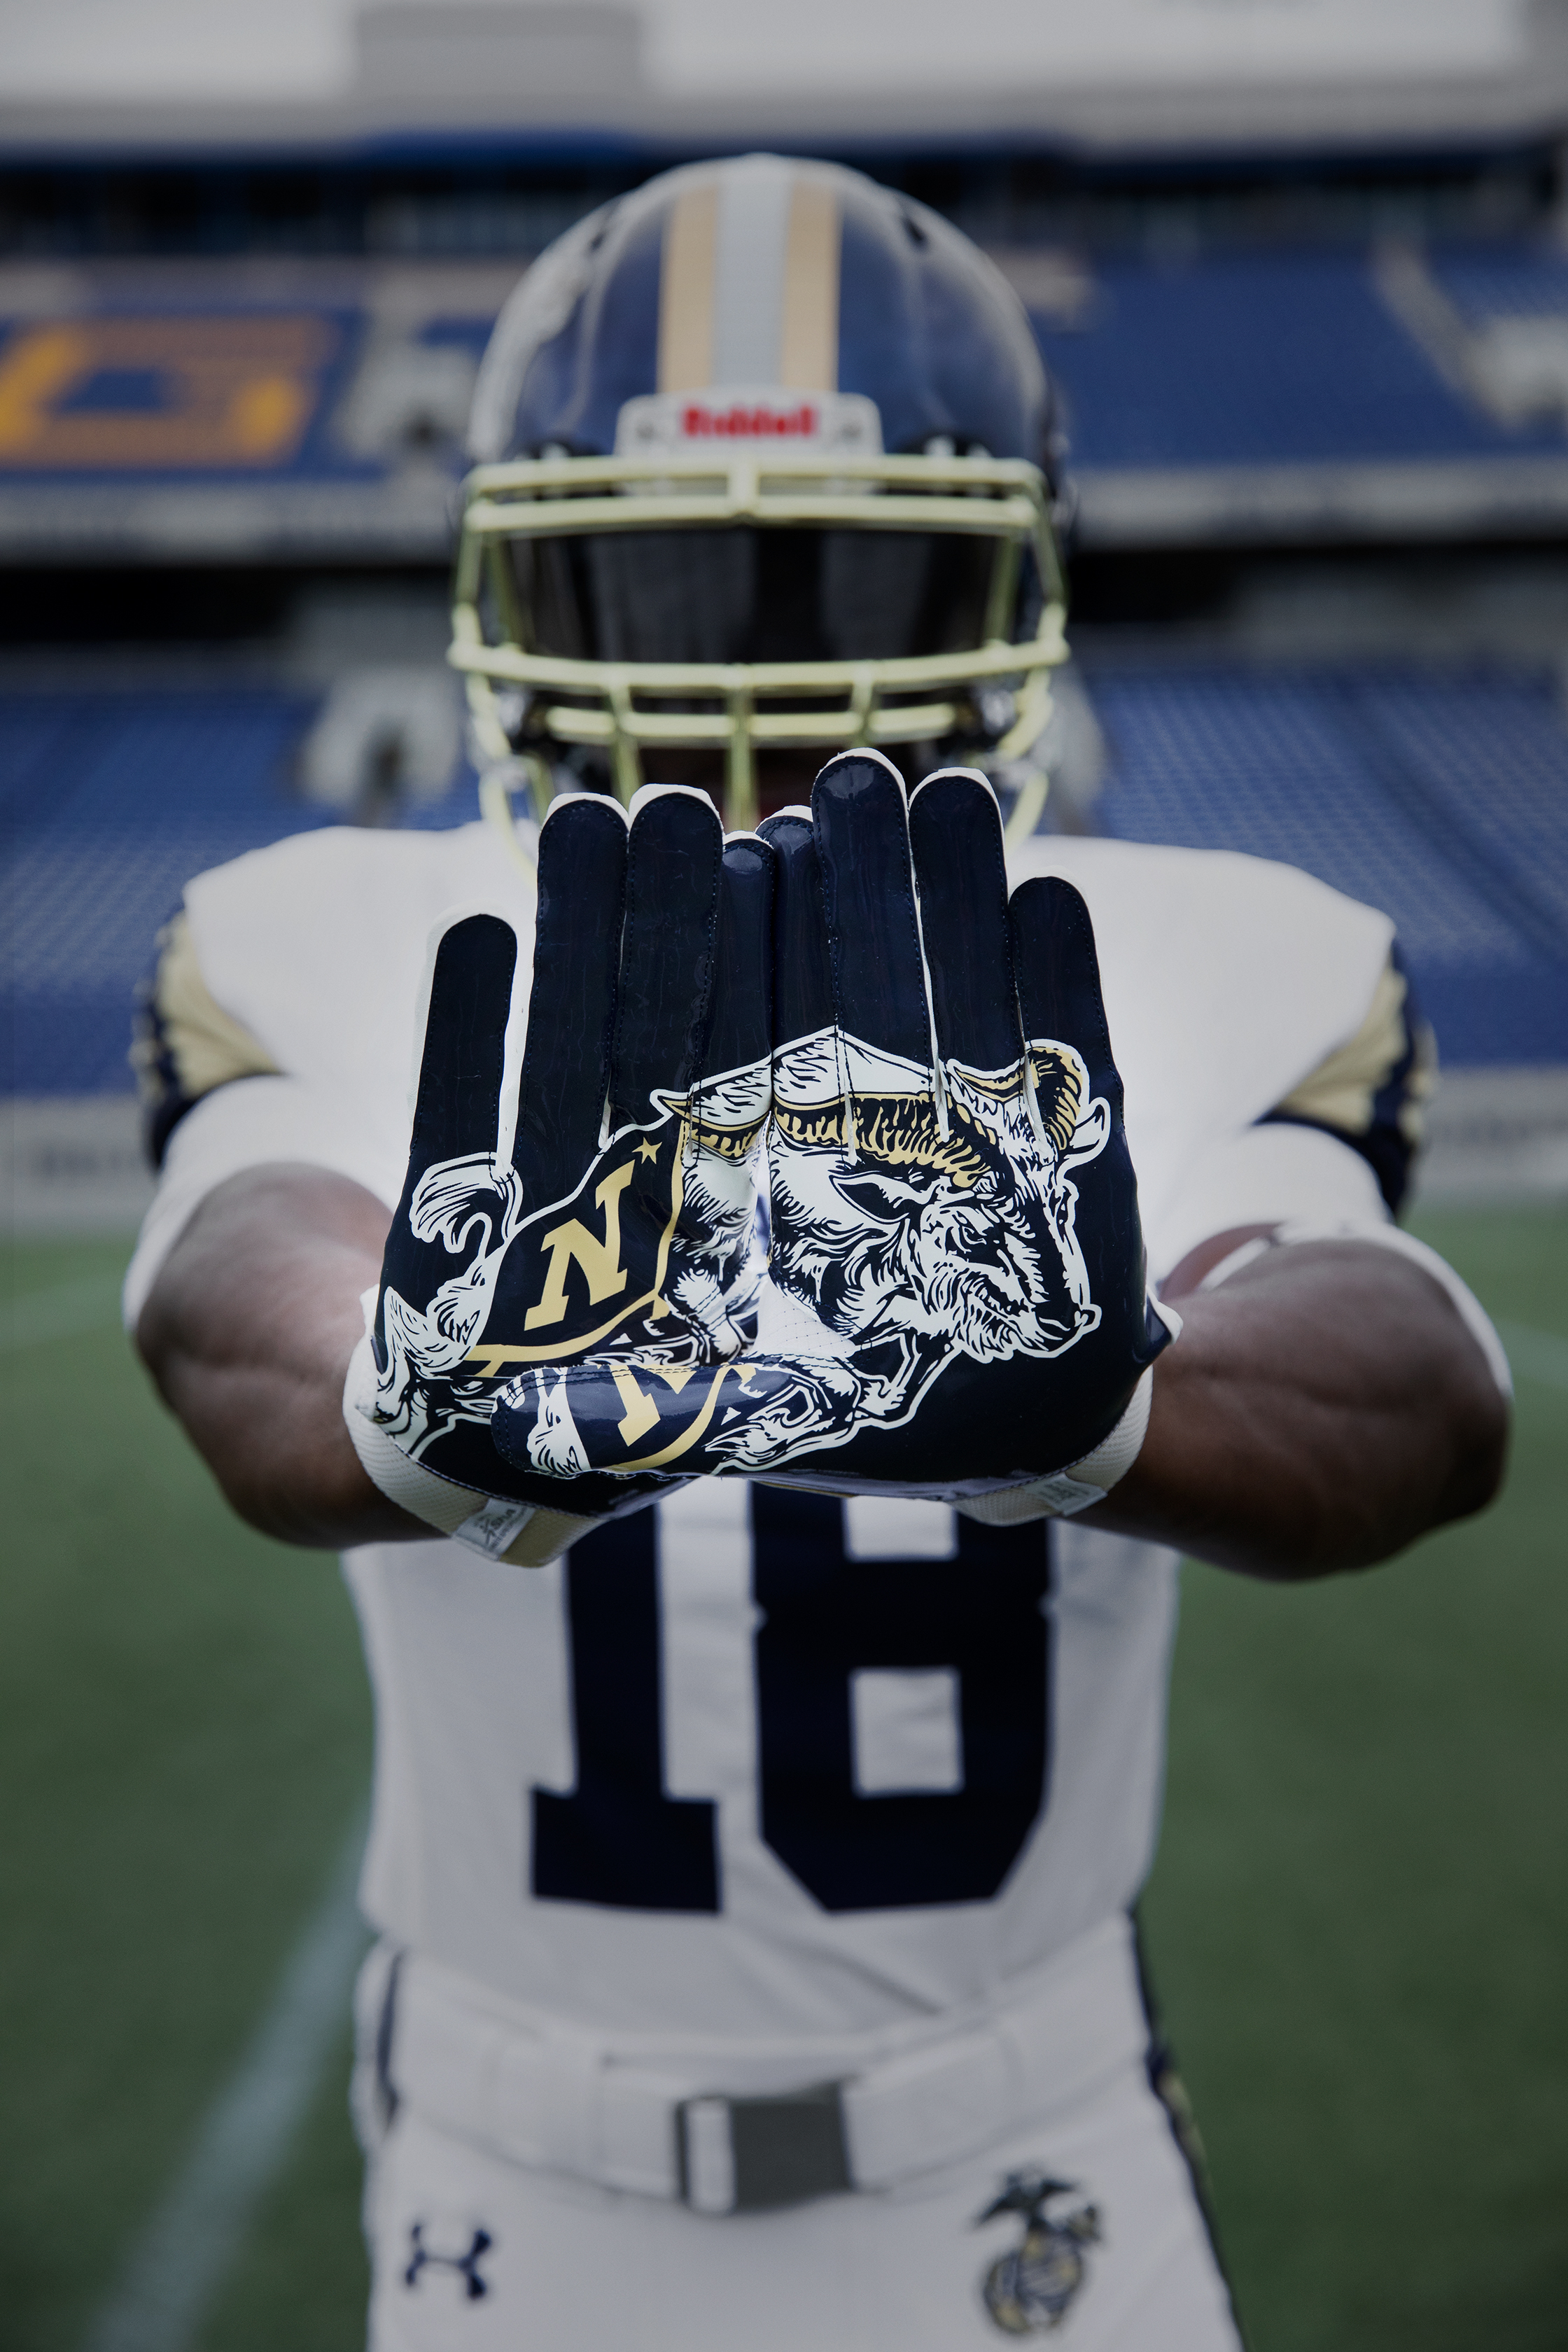 Under Armour & Navy Create Special Uniform For The Army-Navy Game - CBS  Baltimore